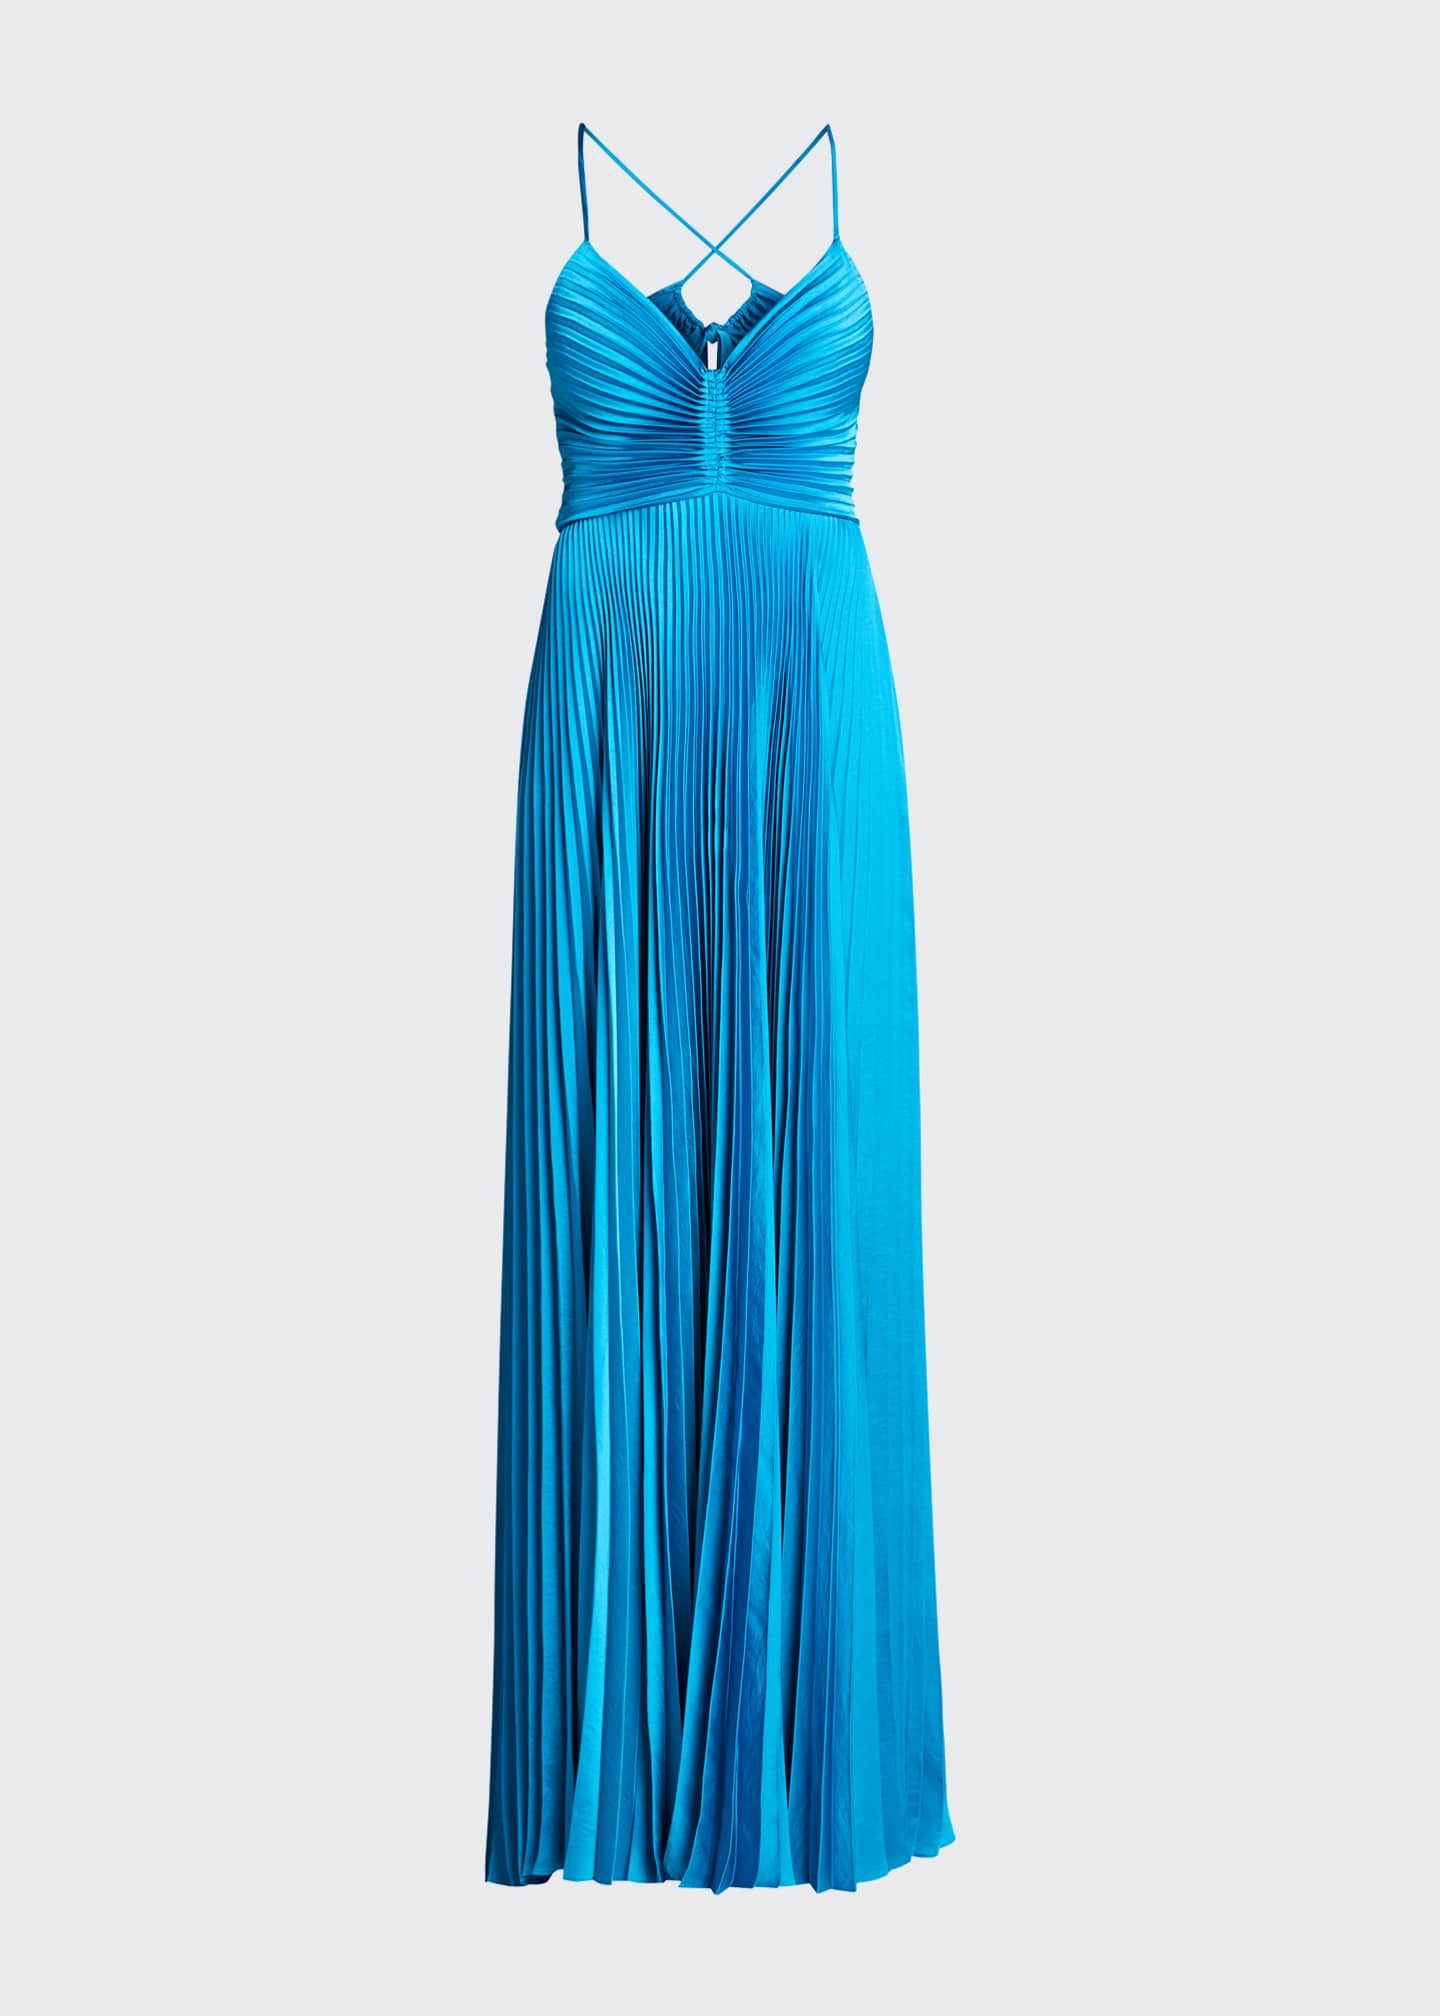 A.L.C. Aries Pleated Gown - Bergdorf Goodman